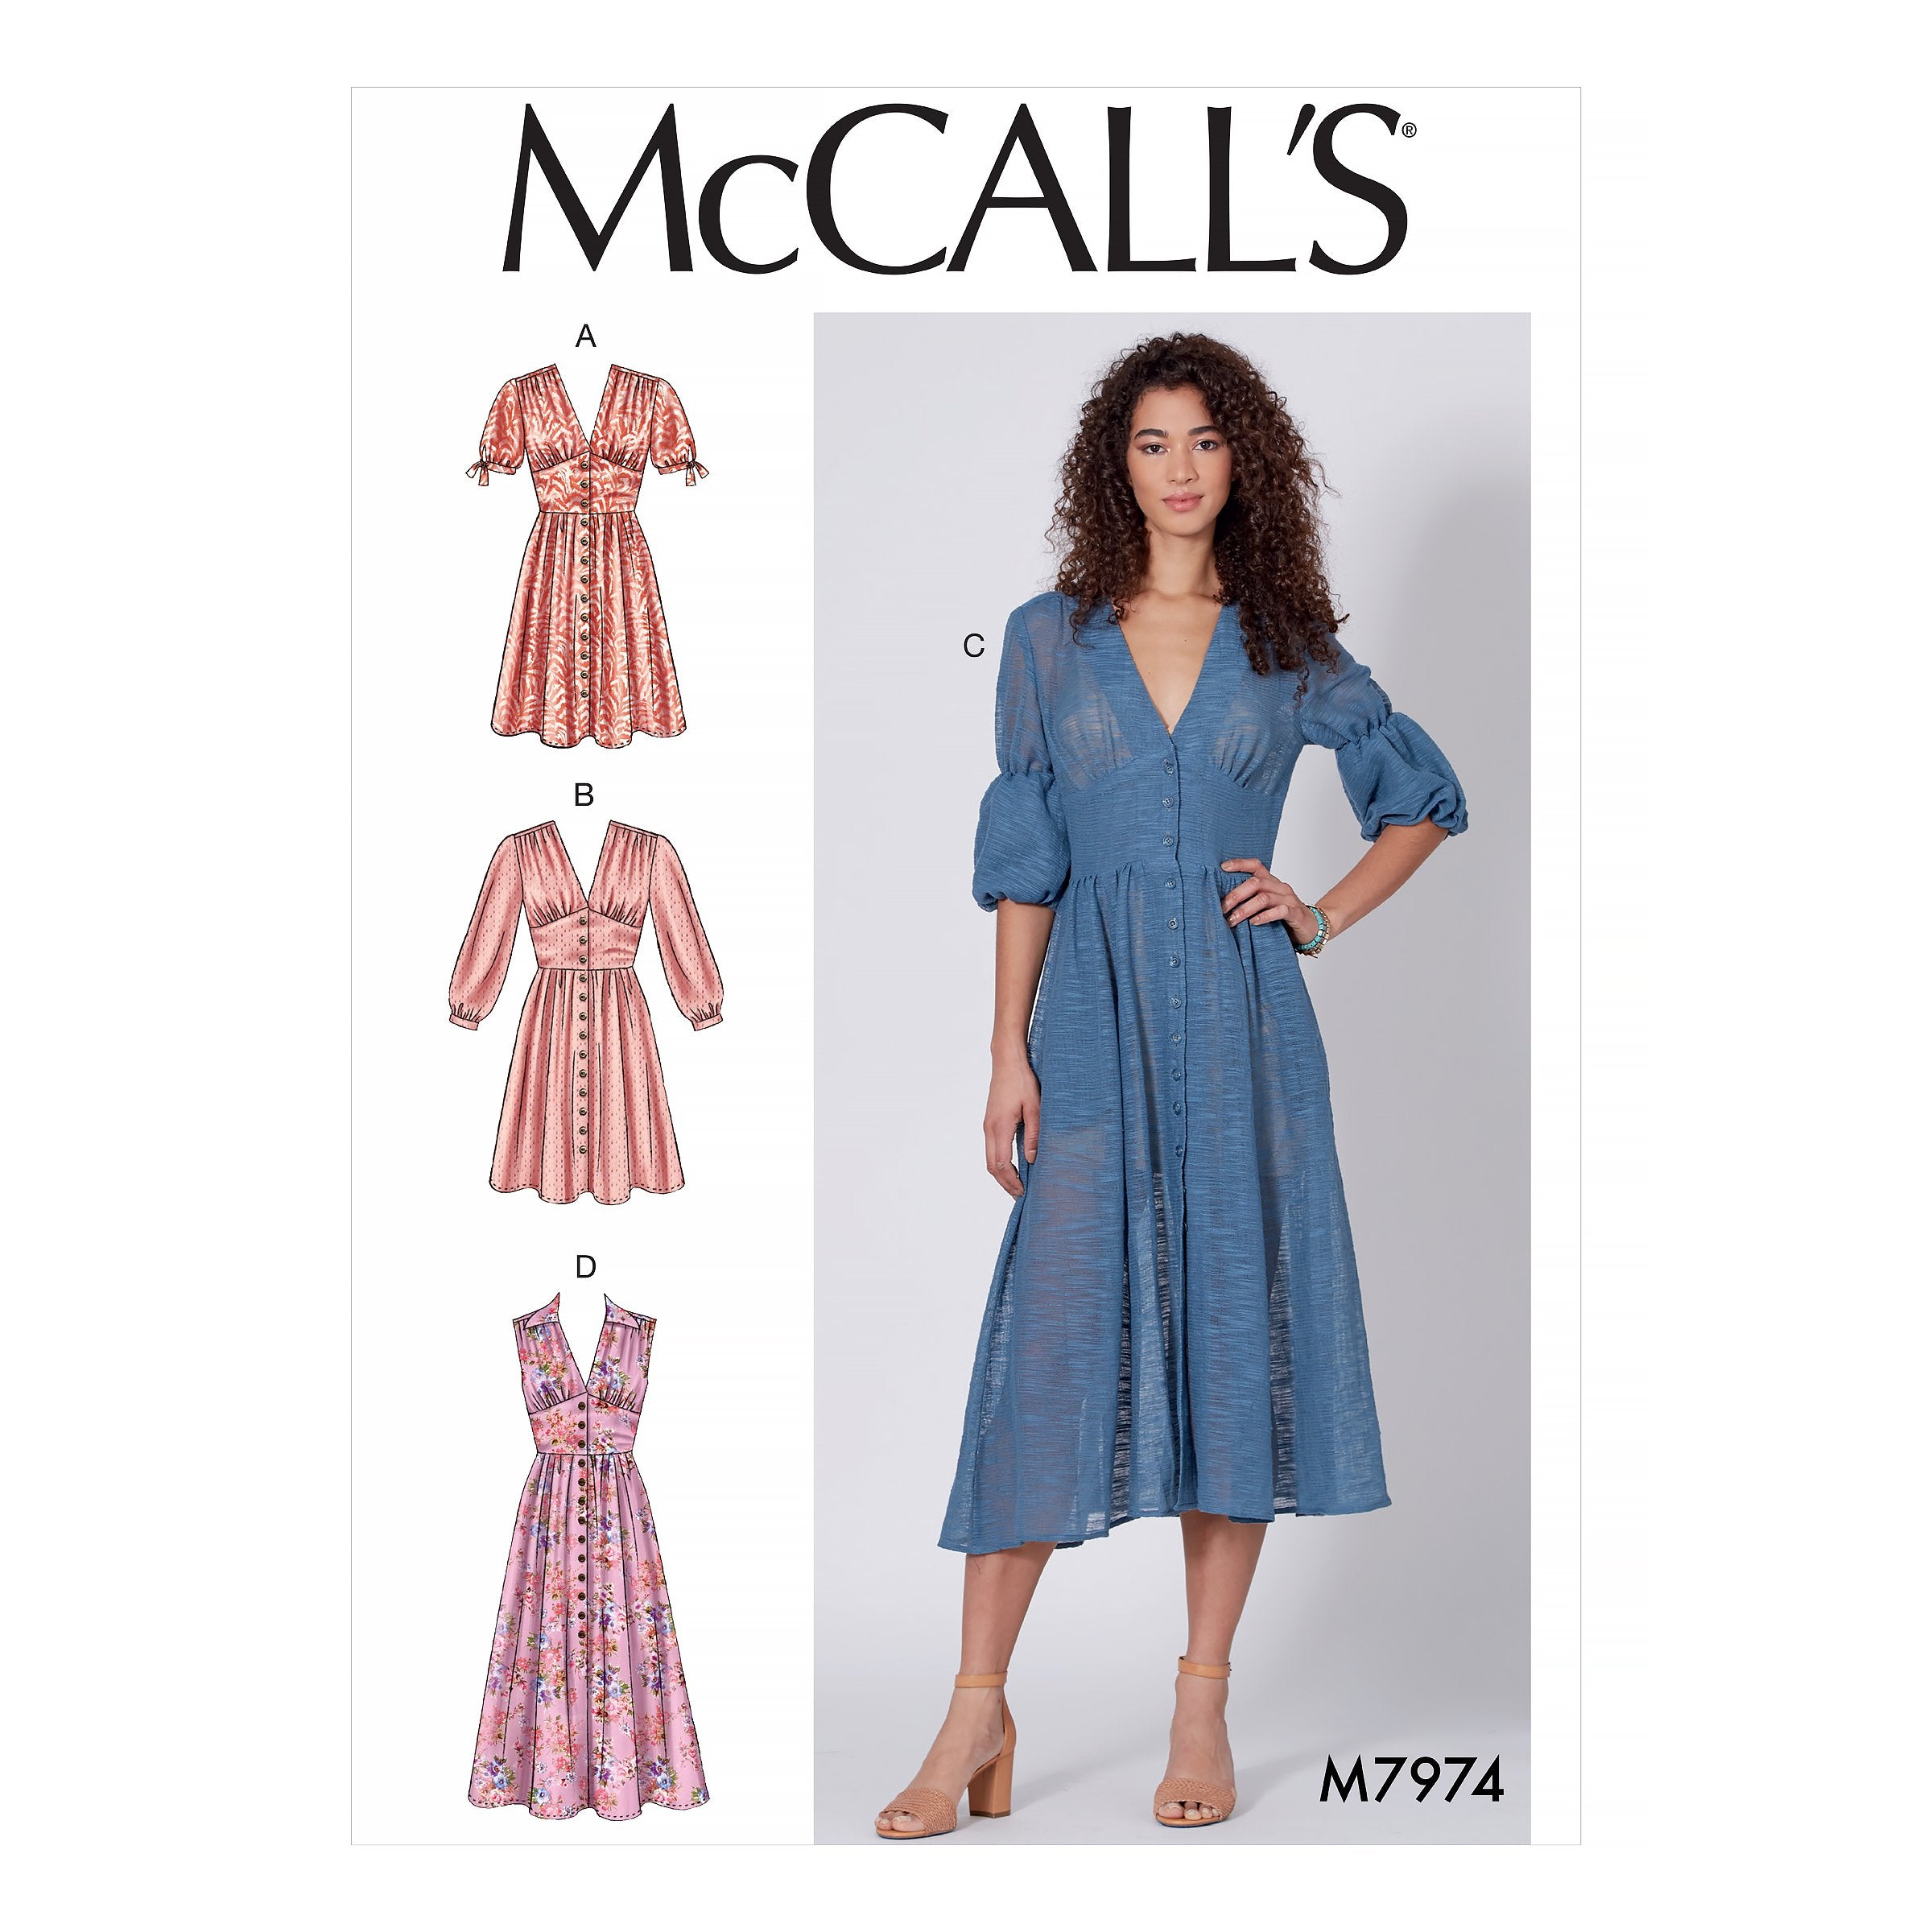 McCalls 7974 Dresses sewing pattern from Jaycotts Sewing Supplies